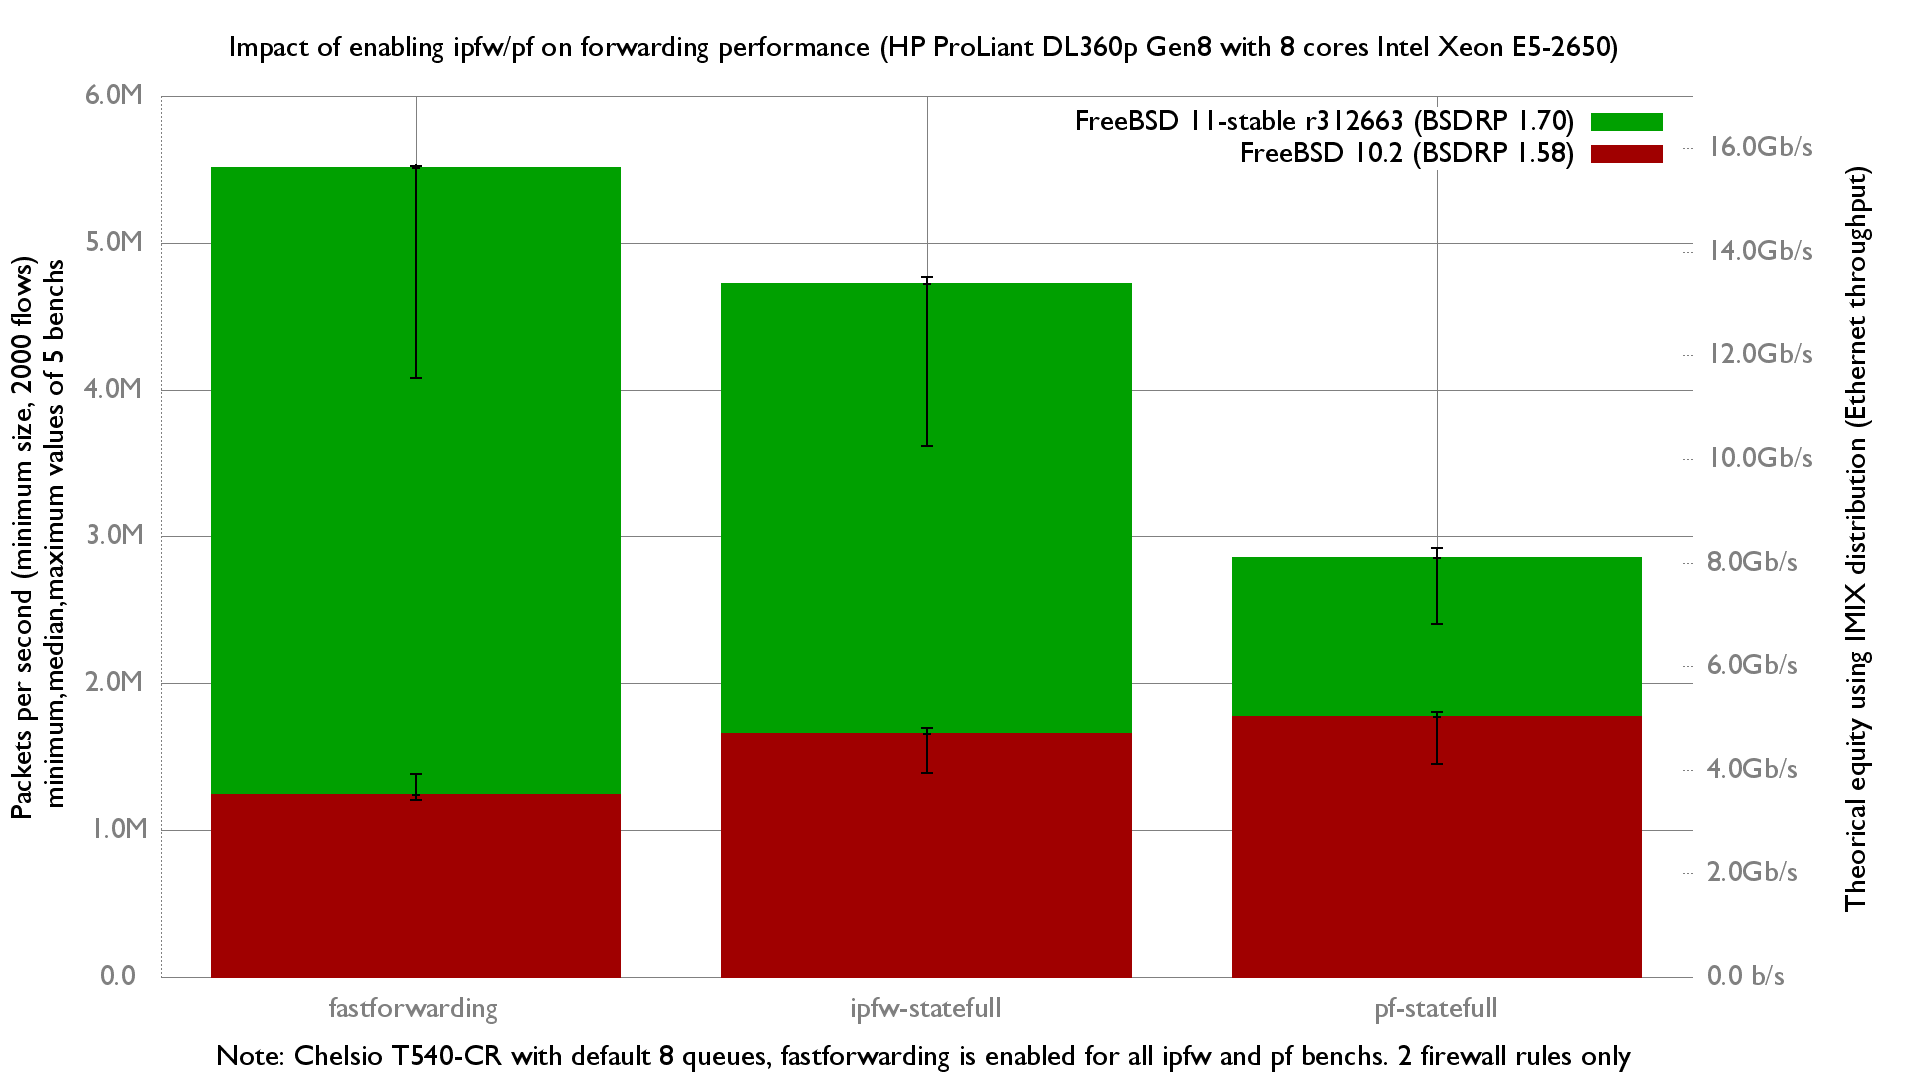 Impact of ipfw and pf on 8 cores Xeon E5-2650 with Chelsio T540-CR on FreeBSD 10.1